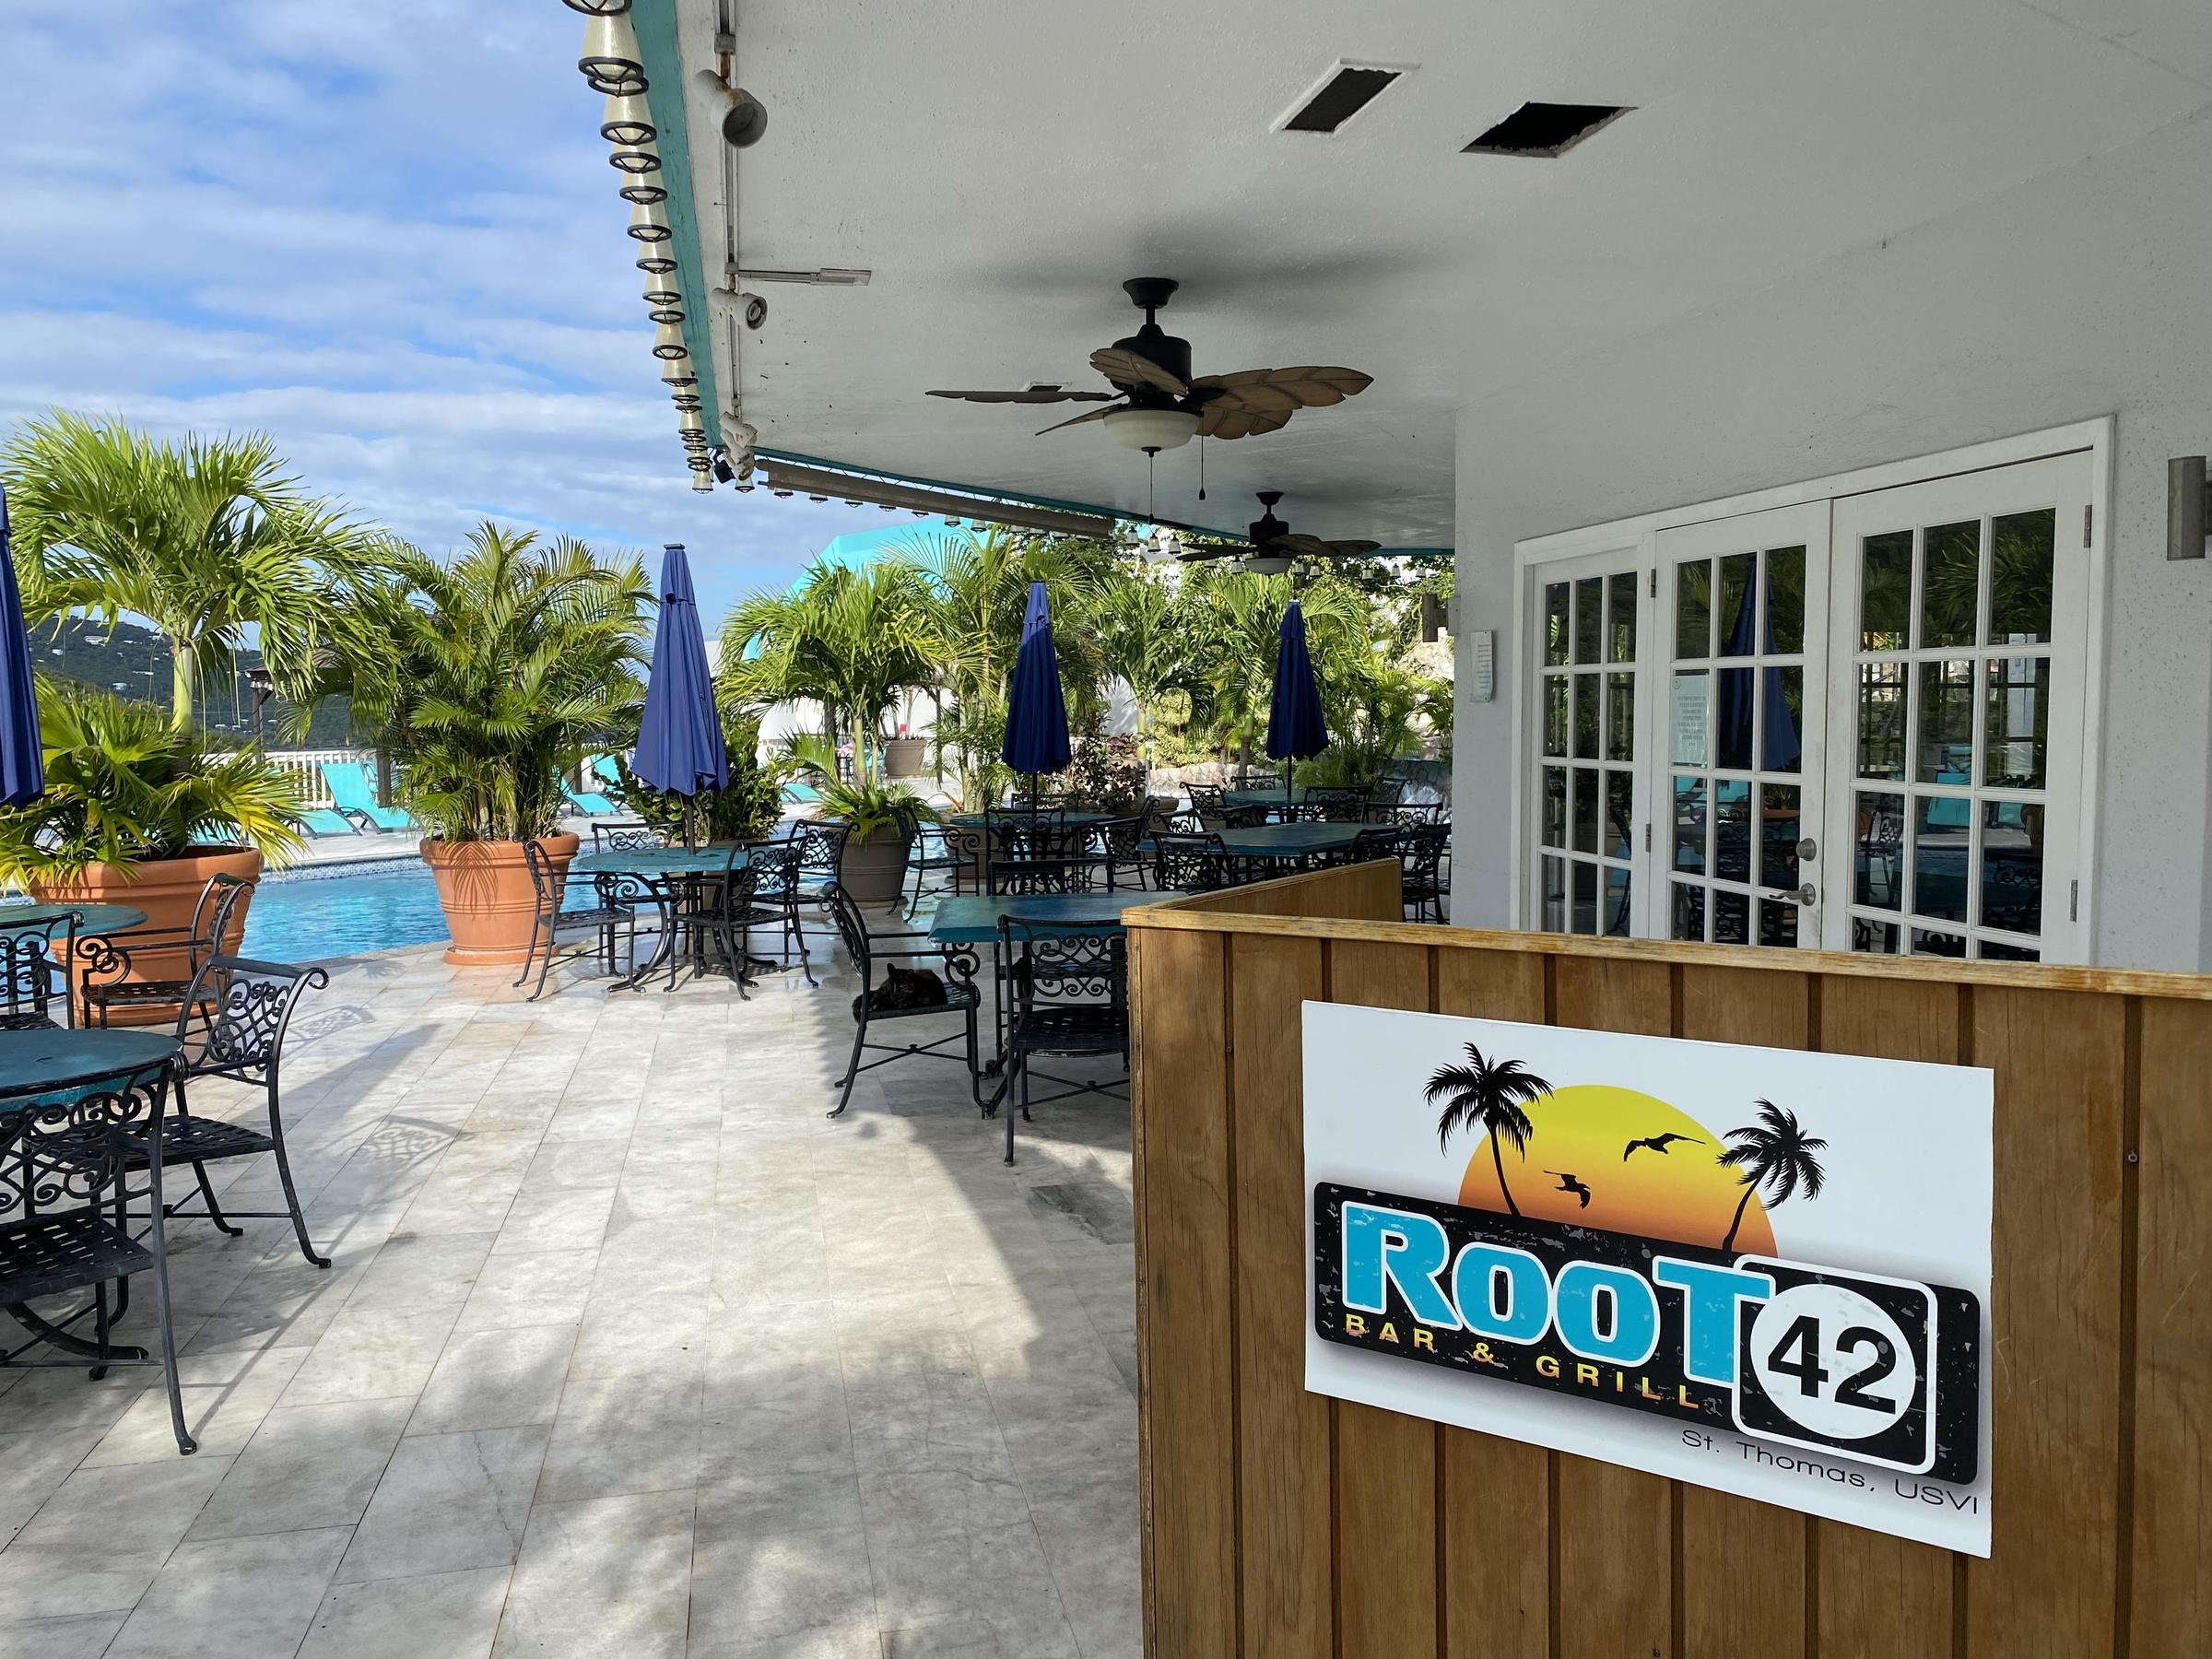 Pet Friendly RooT 42 Bar And Grill